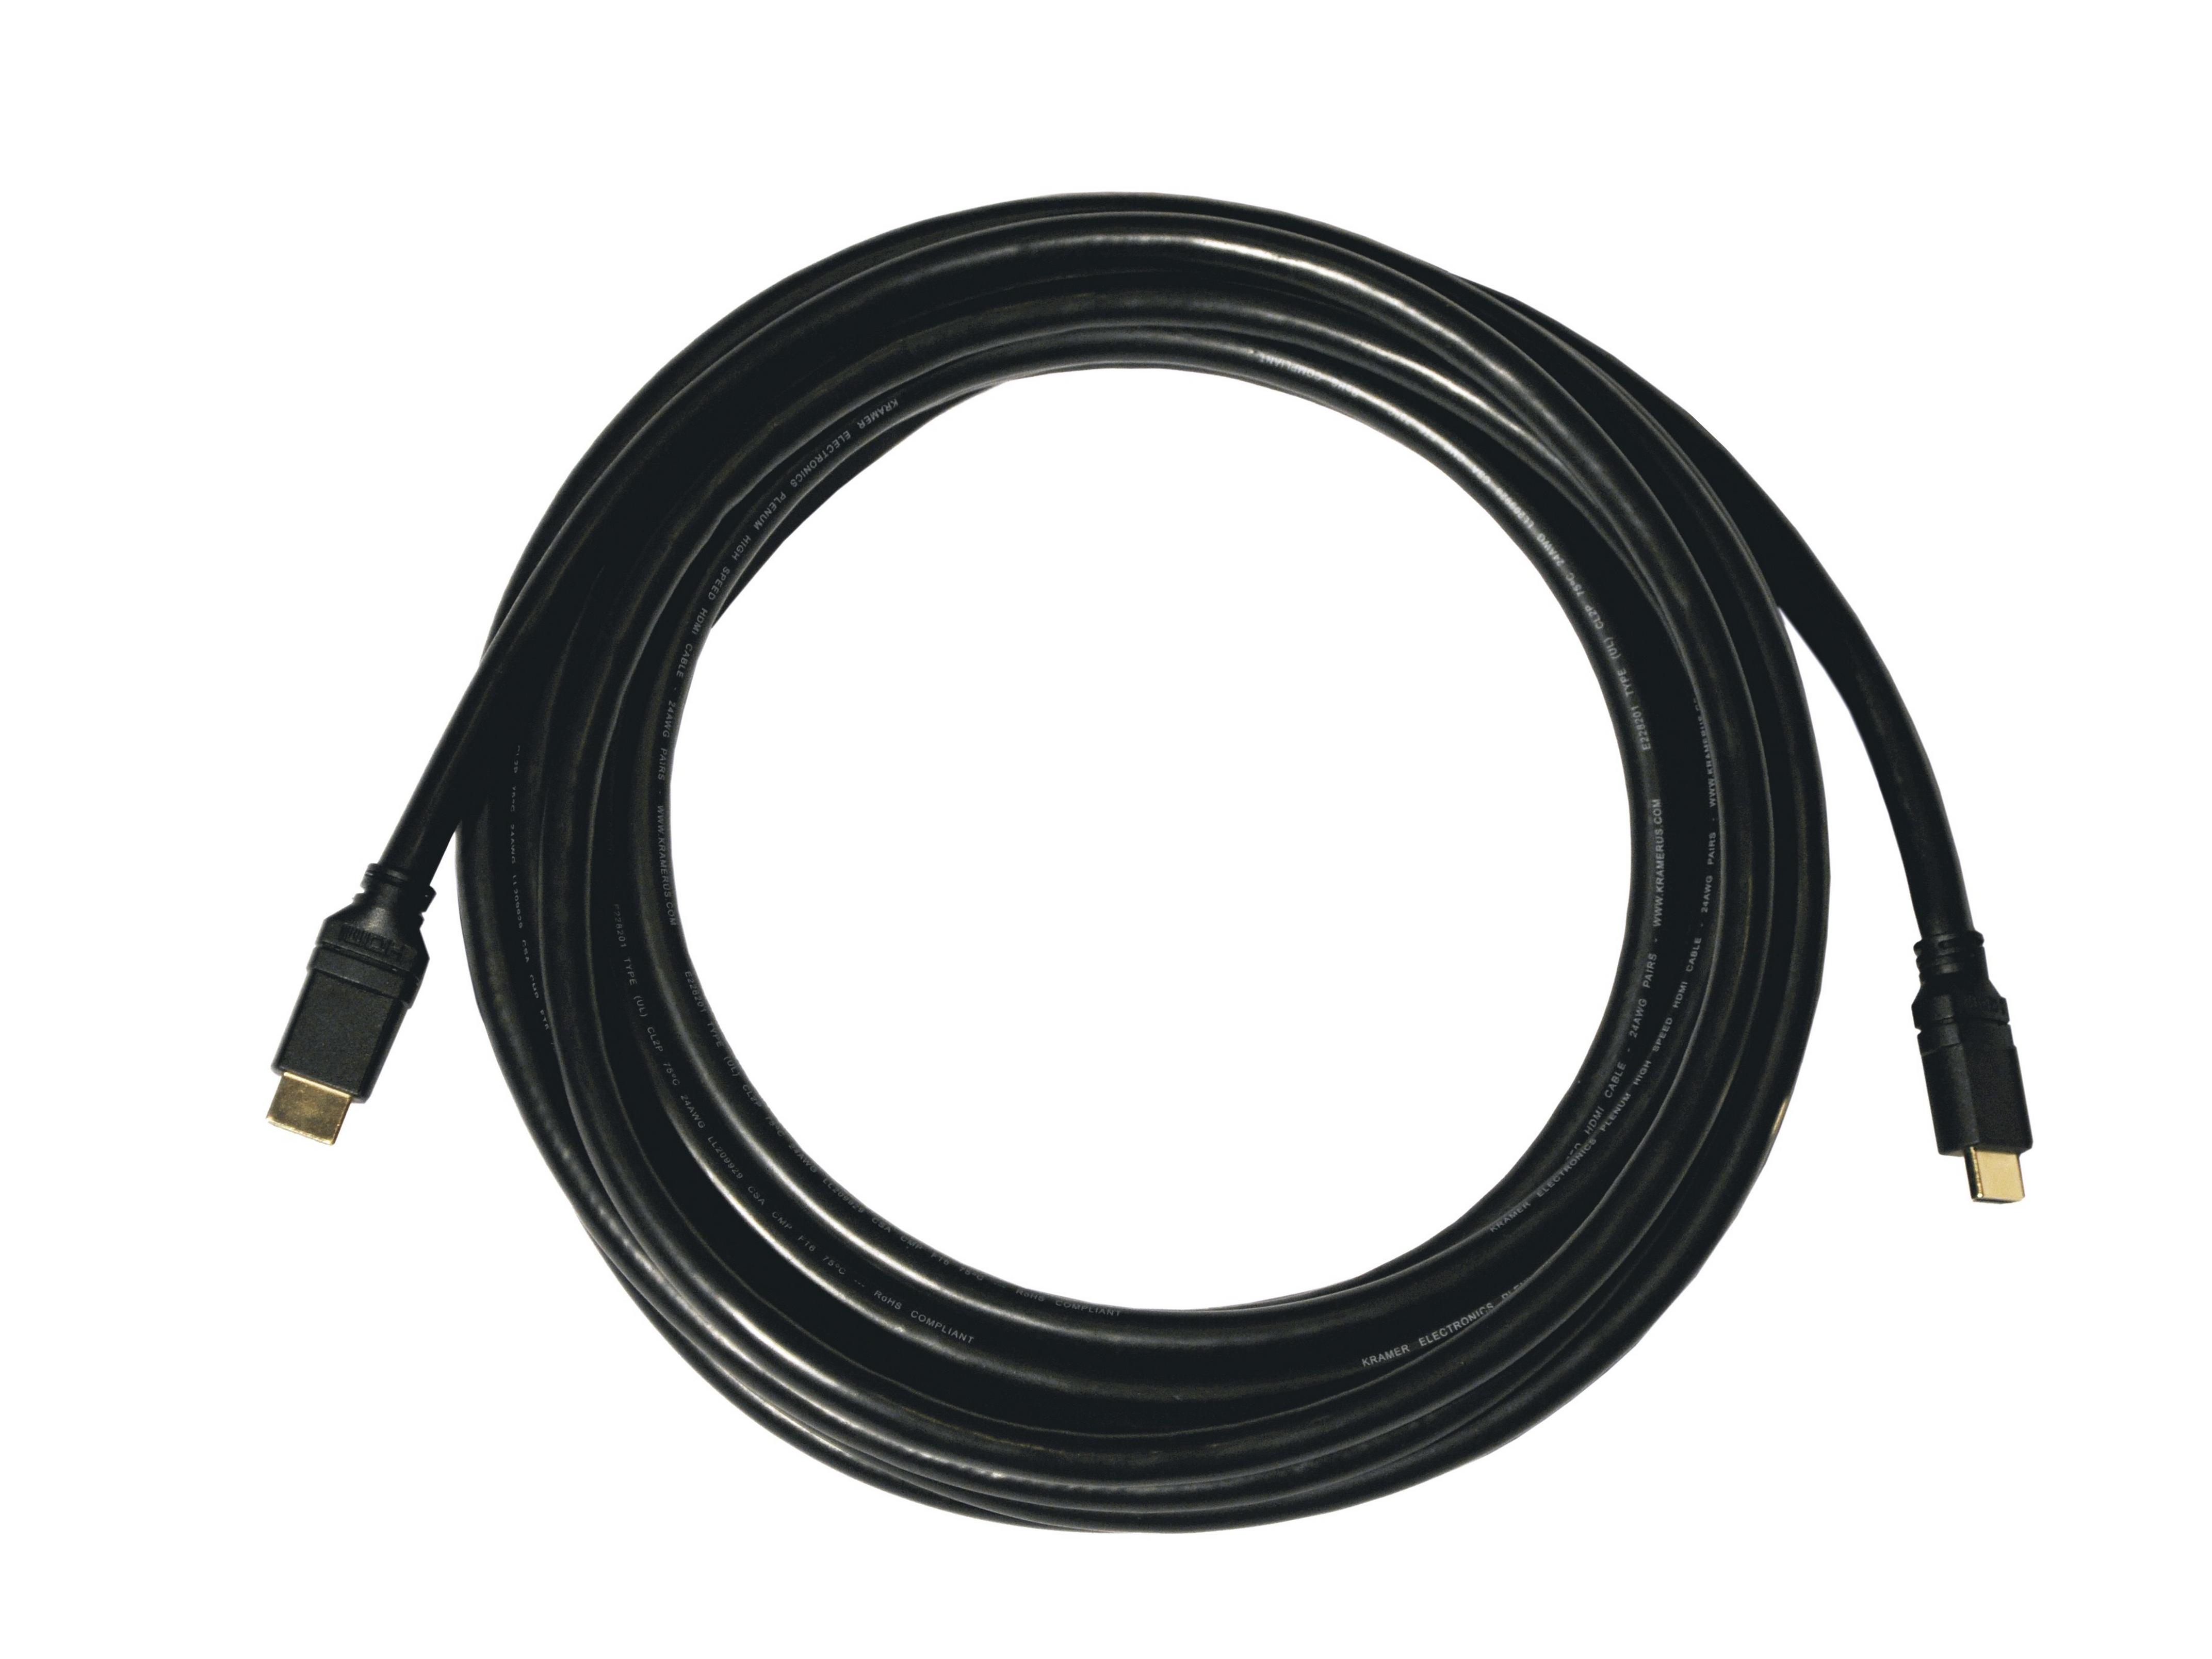 CP-HM/HM/ETH-35 35ft HDMI (M) to HDMI (M) Plenum Rated Cable with Ethernet by Kramer